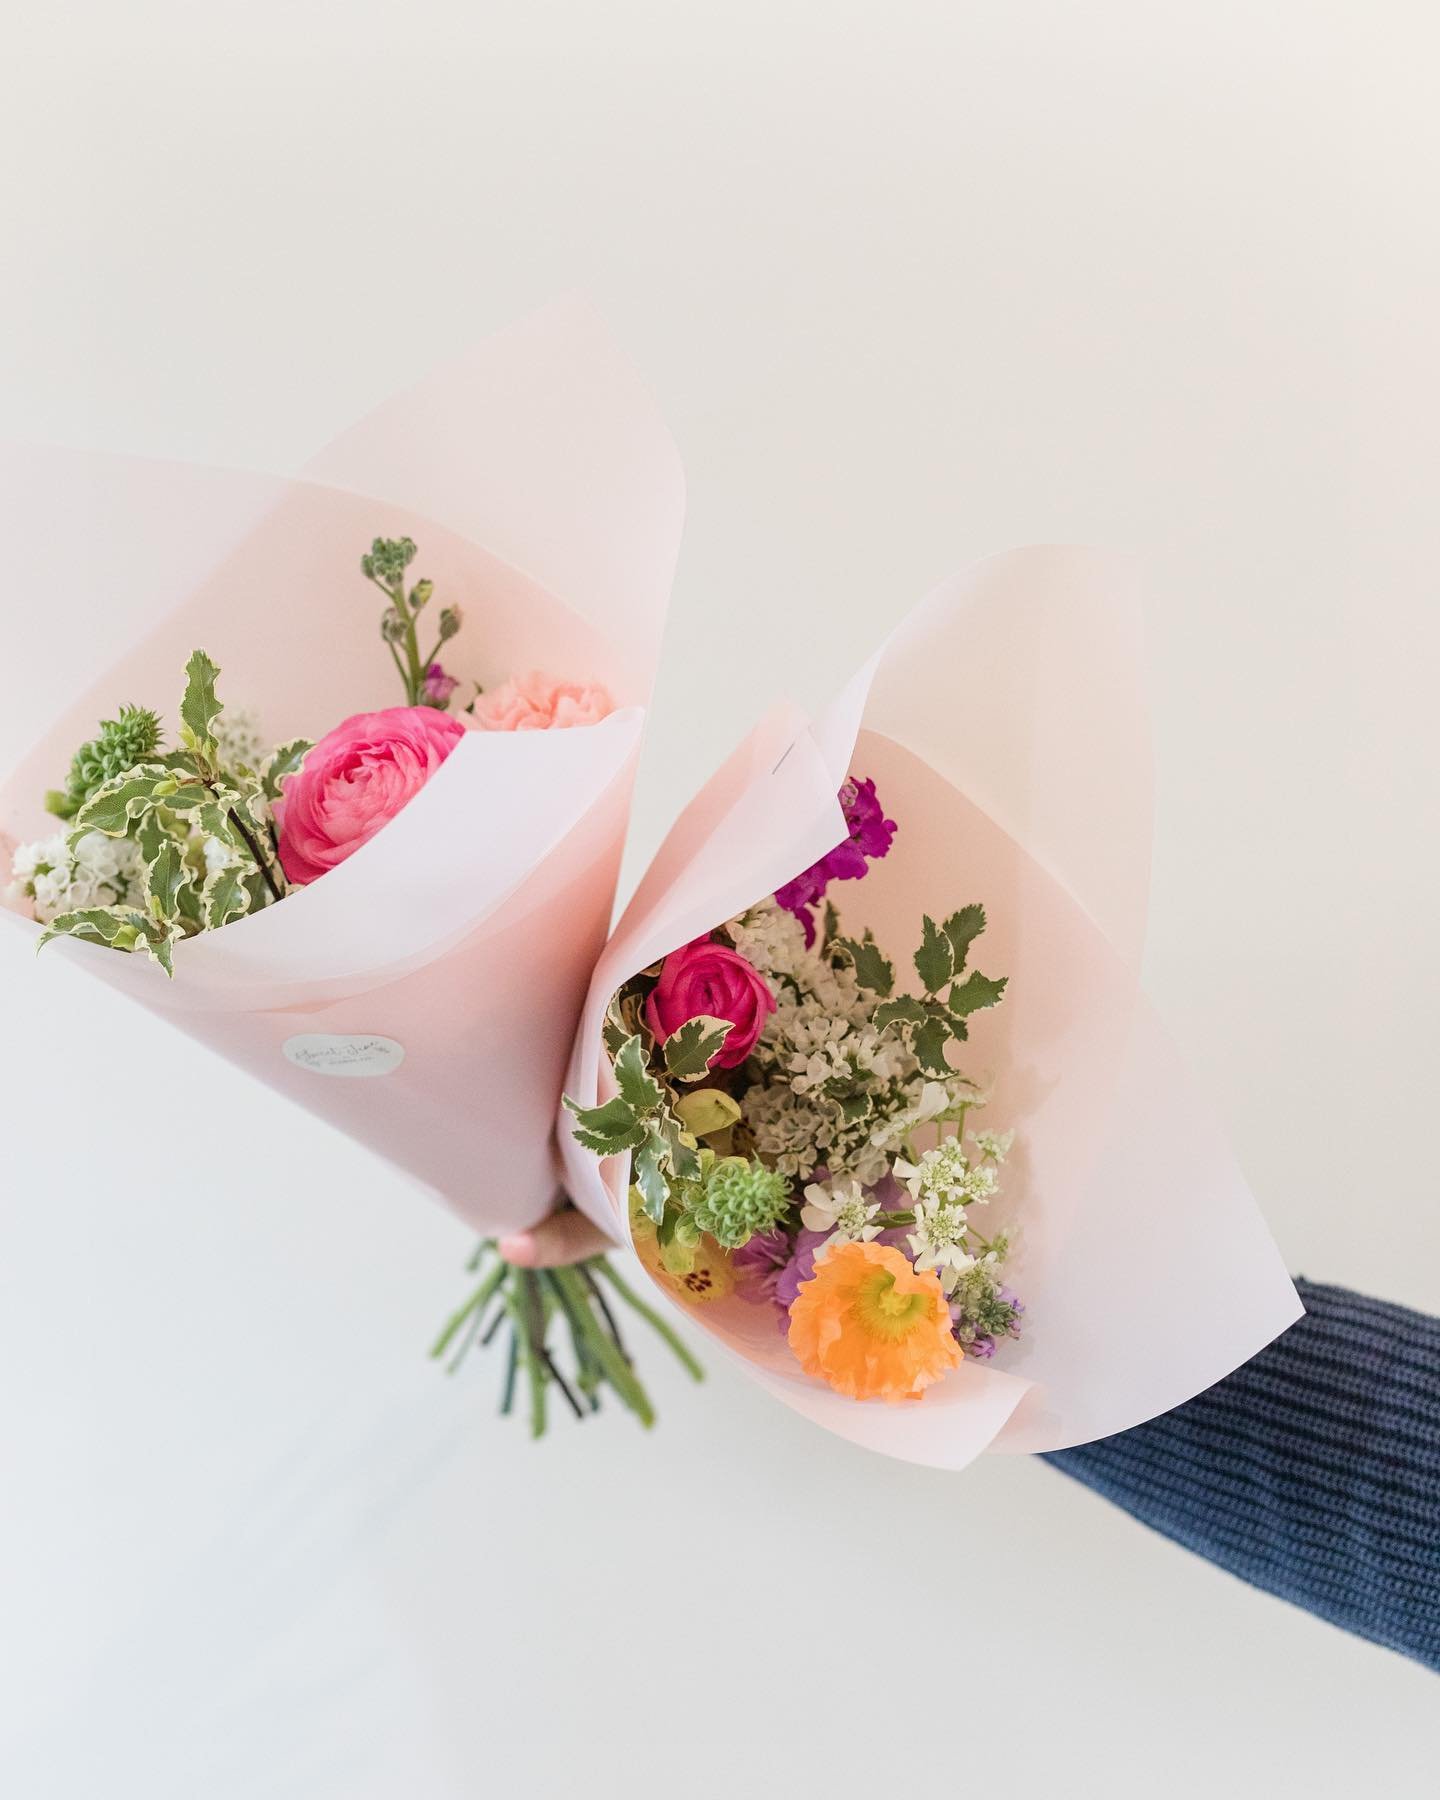 Bundles of joy 🤍

It&rsquo;s been a while since we&rsquo;ve done a giveaway! Tag a friend who you&rsquo;d love to share some flowers with and we will gift both of you small bouquets to enjoy. Giveaway ends this Friday!

Thank you for the warm welcom